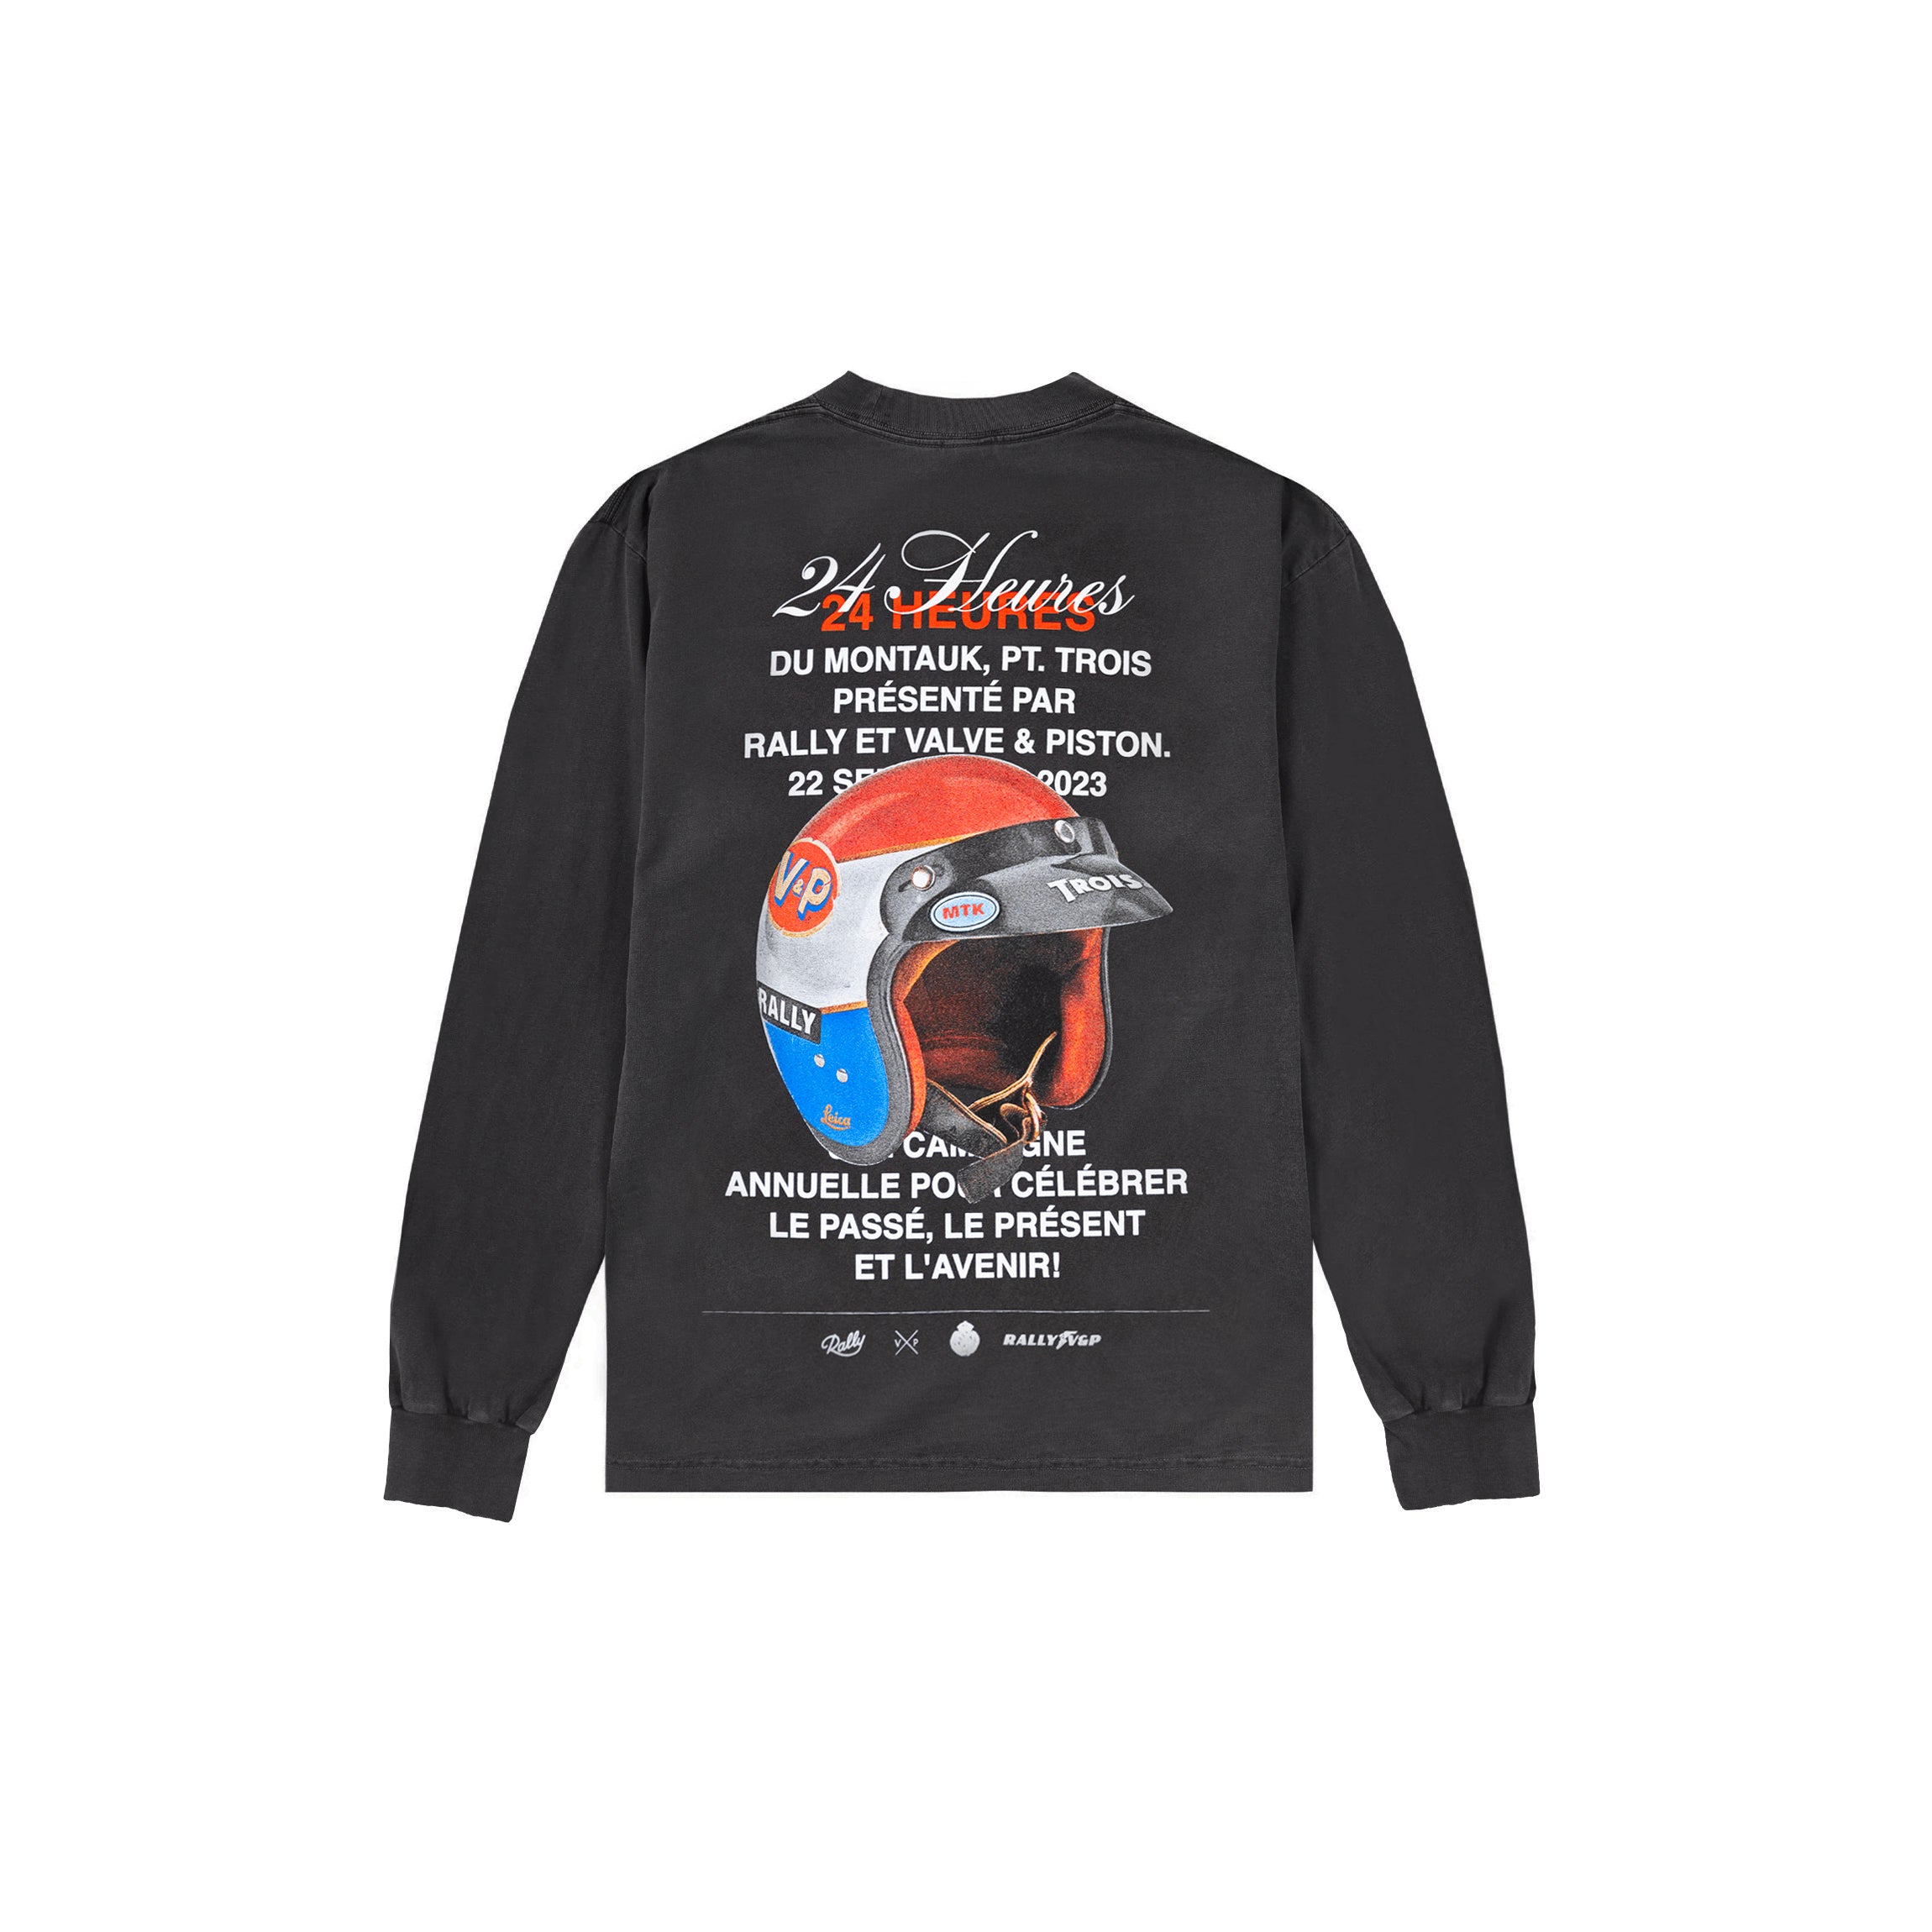 Vintage black long sleeve tee with screen printed design in the back featuring the title 24 Heures du Montauk, Pt. Trois + a vintage drivers helmet.